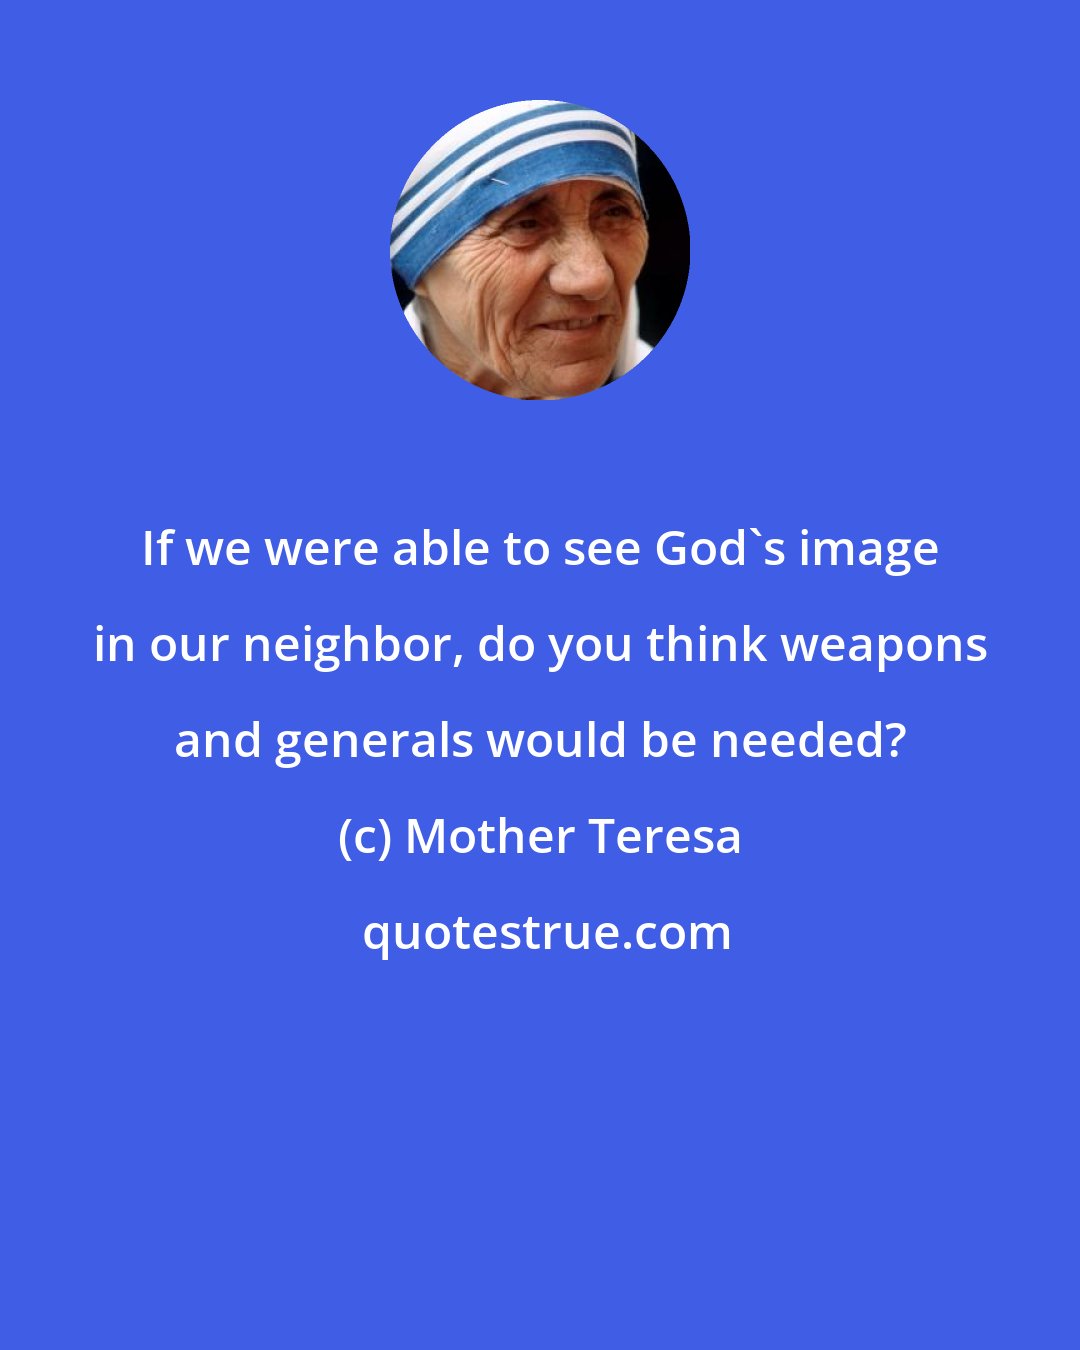 Mother Teresa: If we were able to see God's image in our neighbor, do you think weapons and generals would be needed?